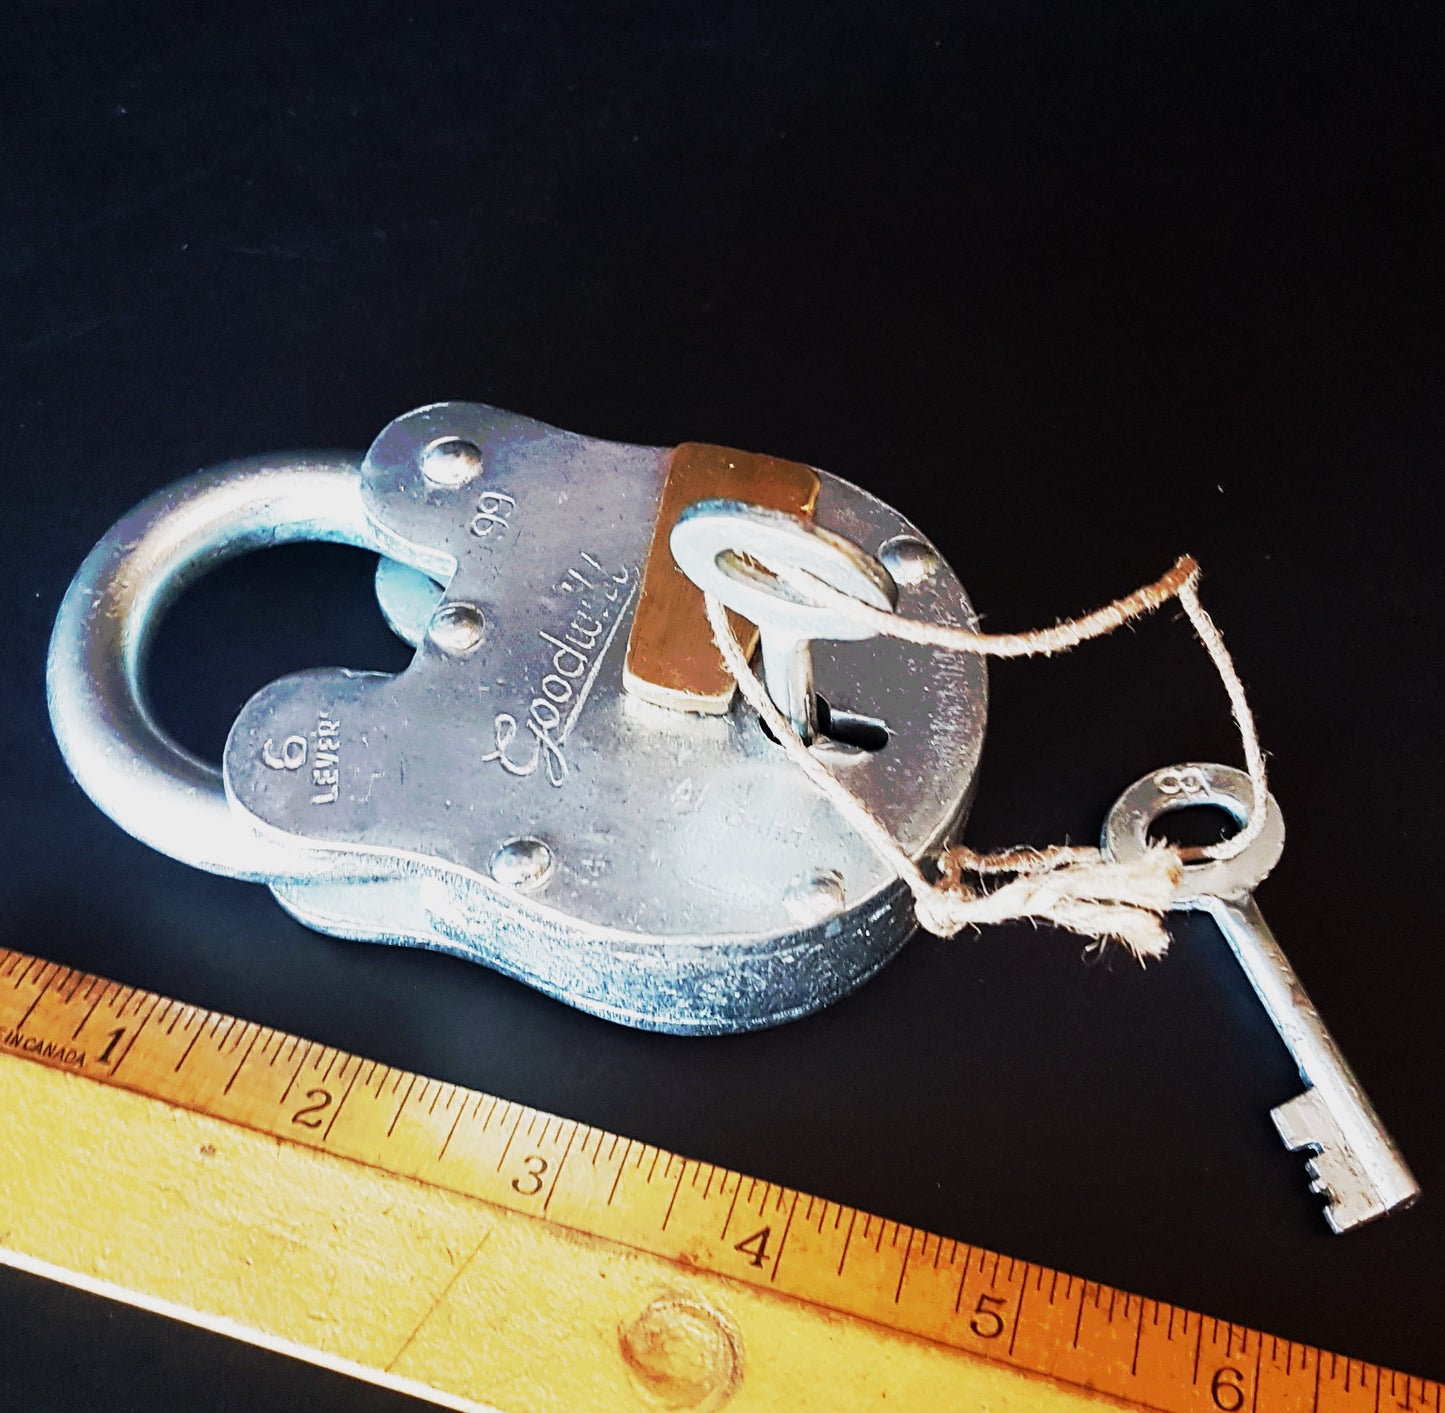 Heavy steel padlock 4.5 x 2.5 inches with 2 keys. Vintage silver polished finish. Antique nautical design. Multi purpose locking device.